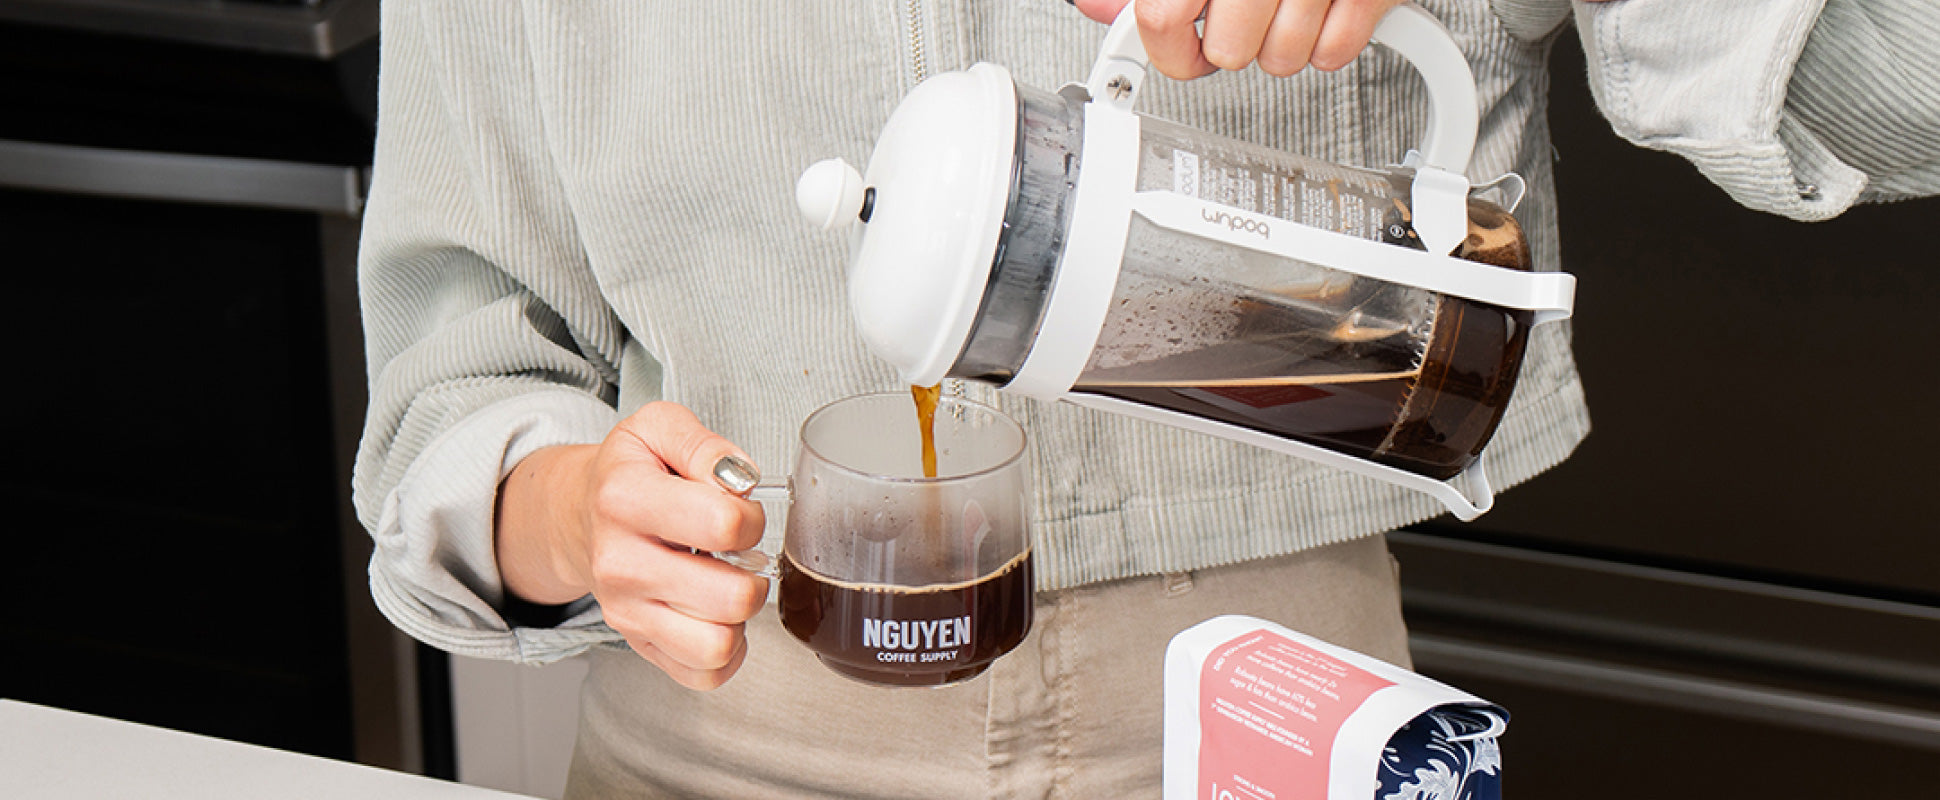 Impress Coffee Brewer Mug Lets You Brew French Press with Ease